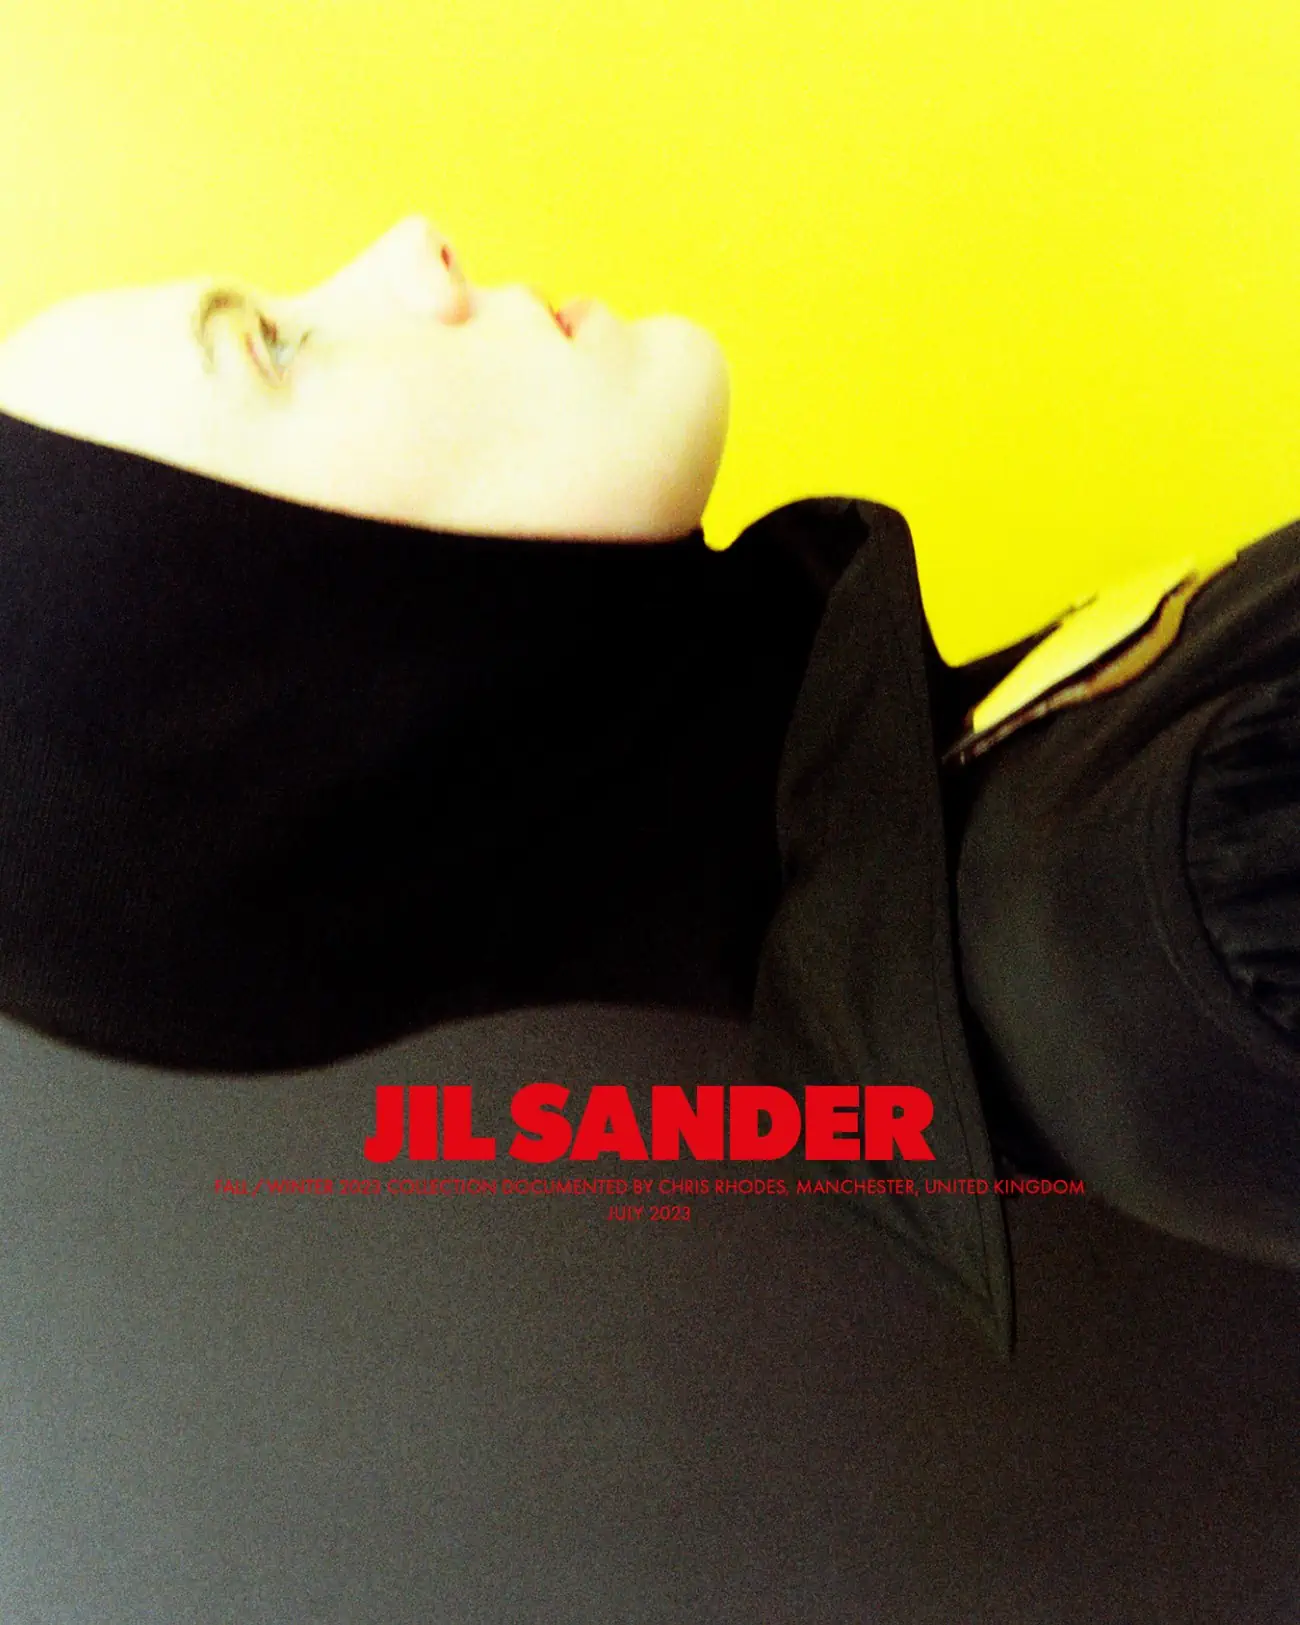 Jil Sander and Jeff Mills unite for a stunning Fall-Winter 2023 campaign